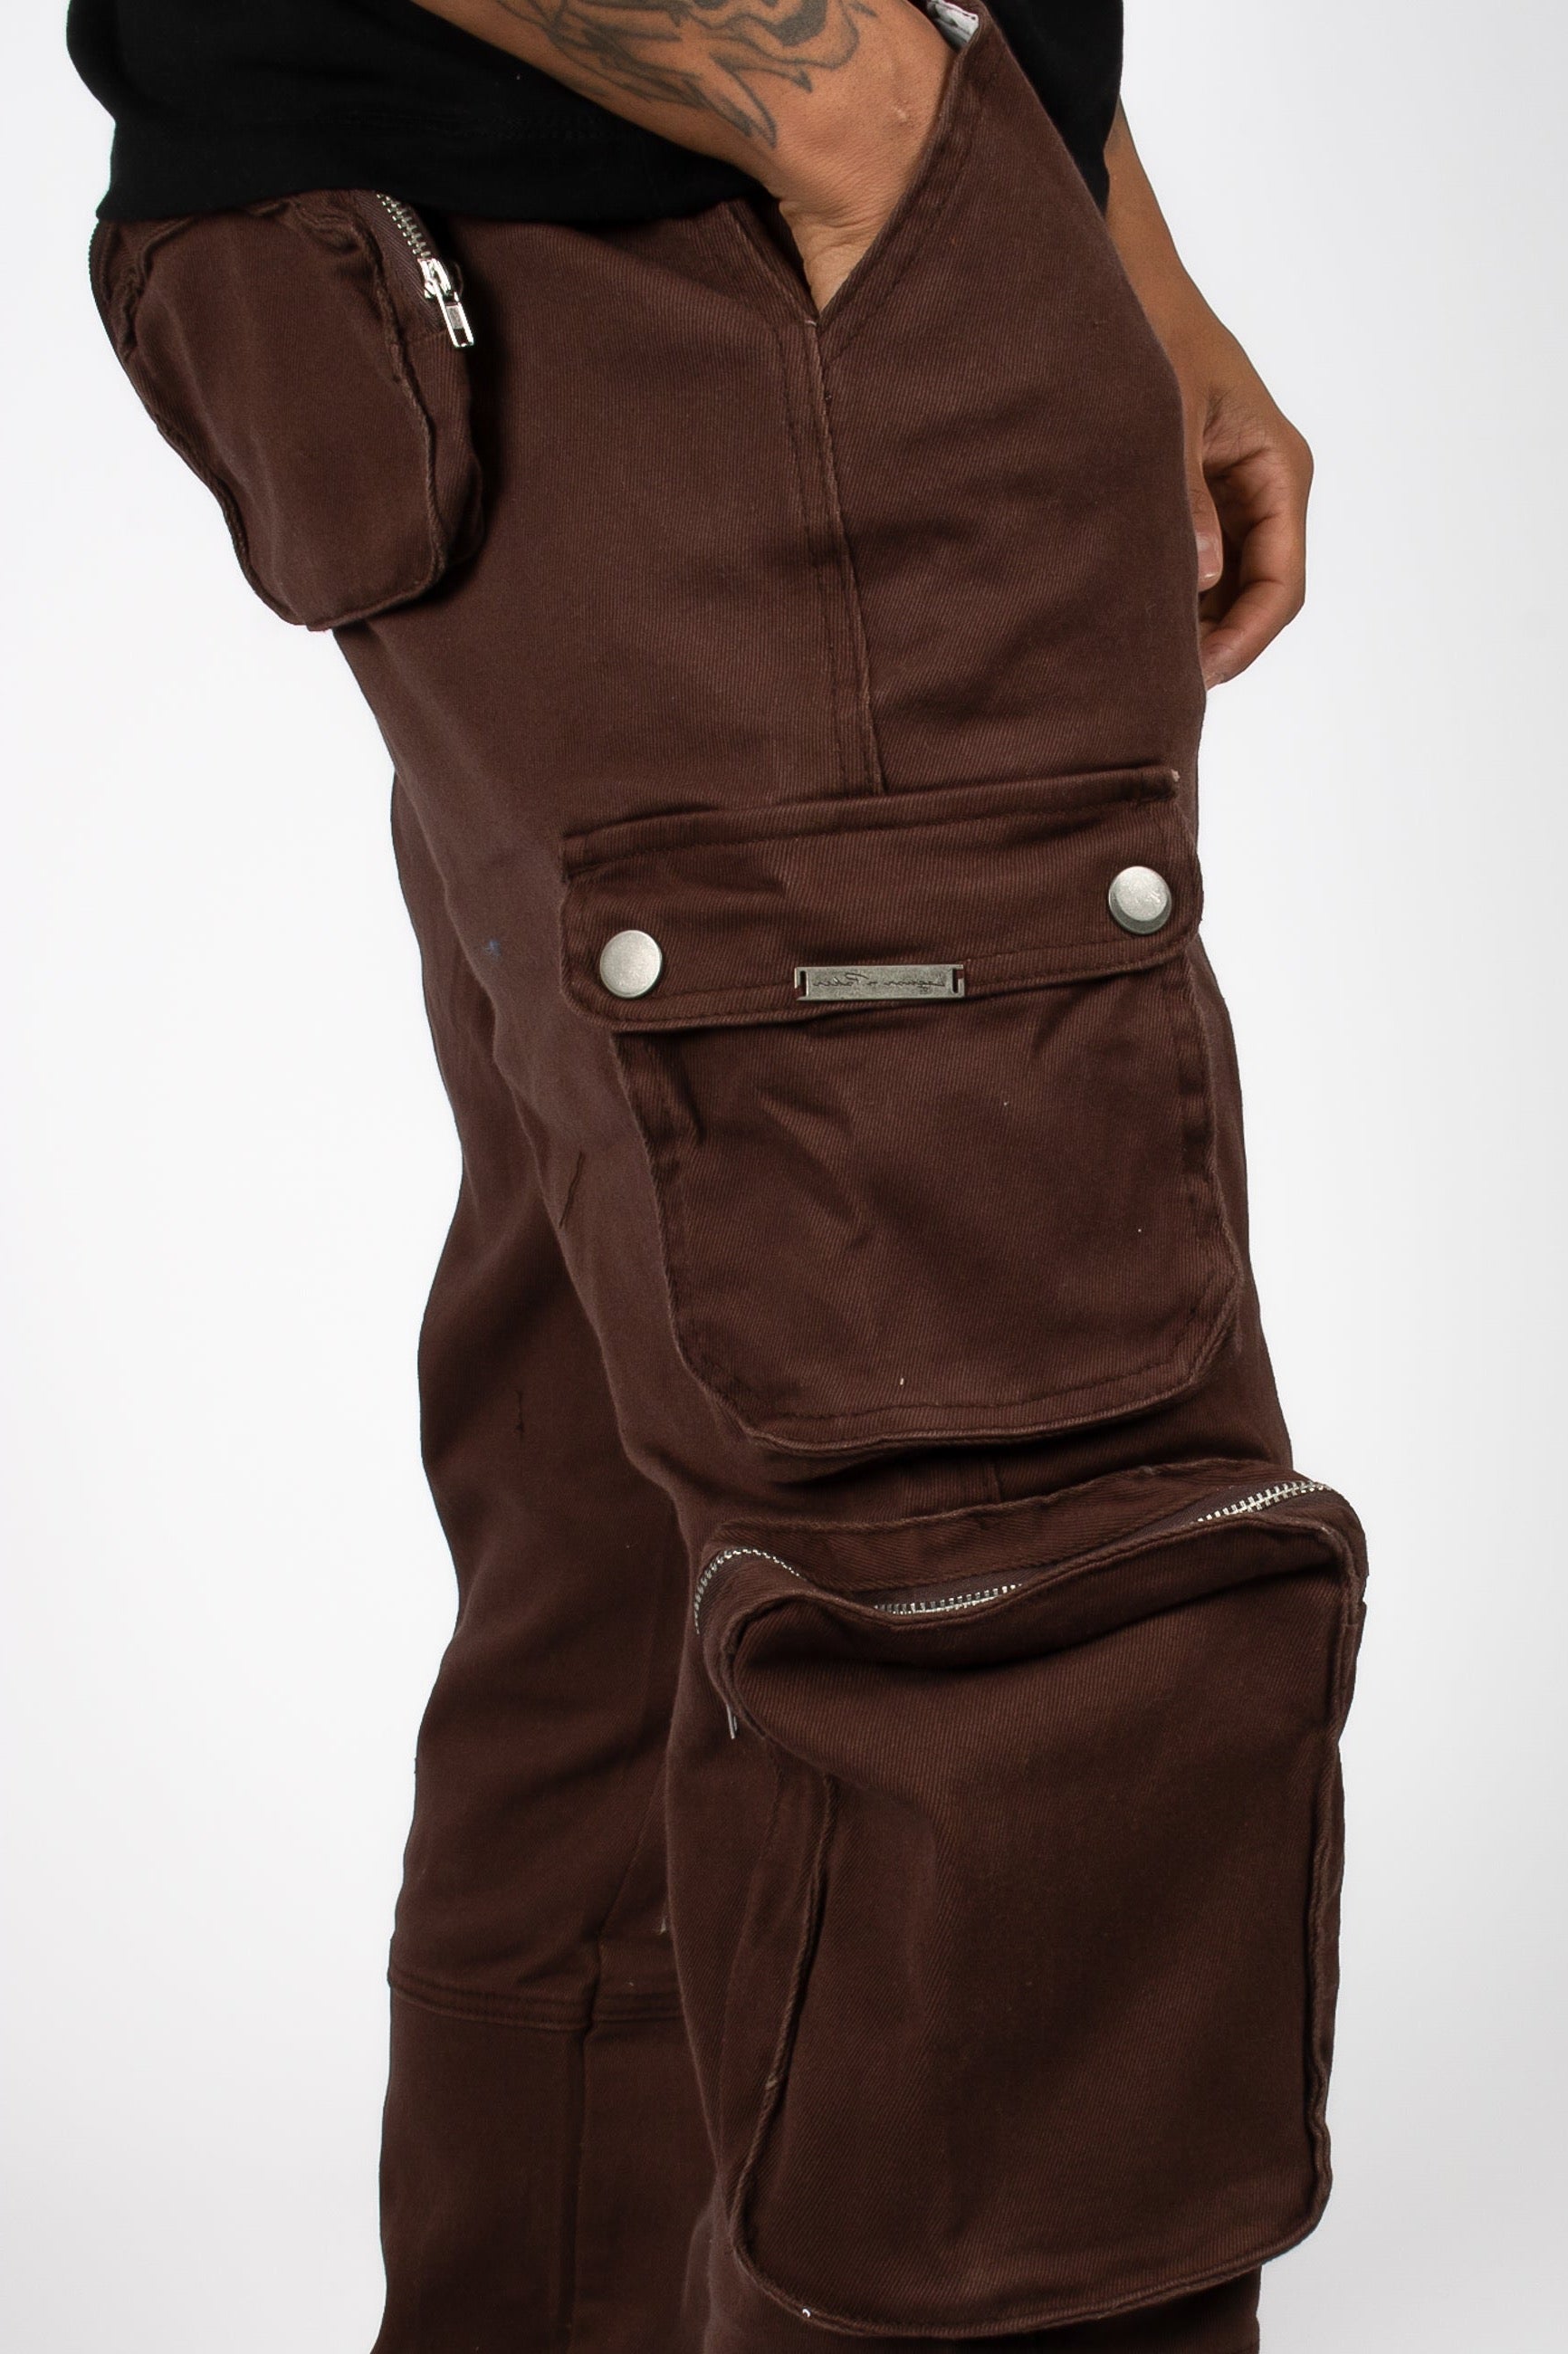 LNP Official  Relaxed Fit Utility Cargo Pants In Chocolate Brown